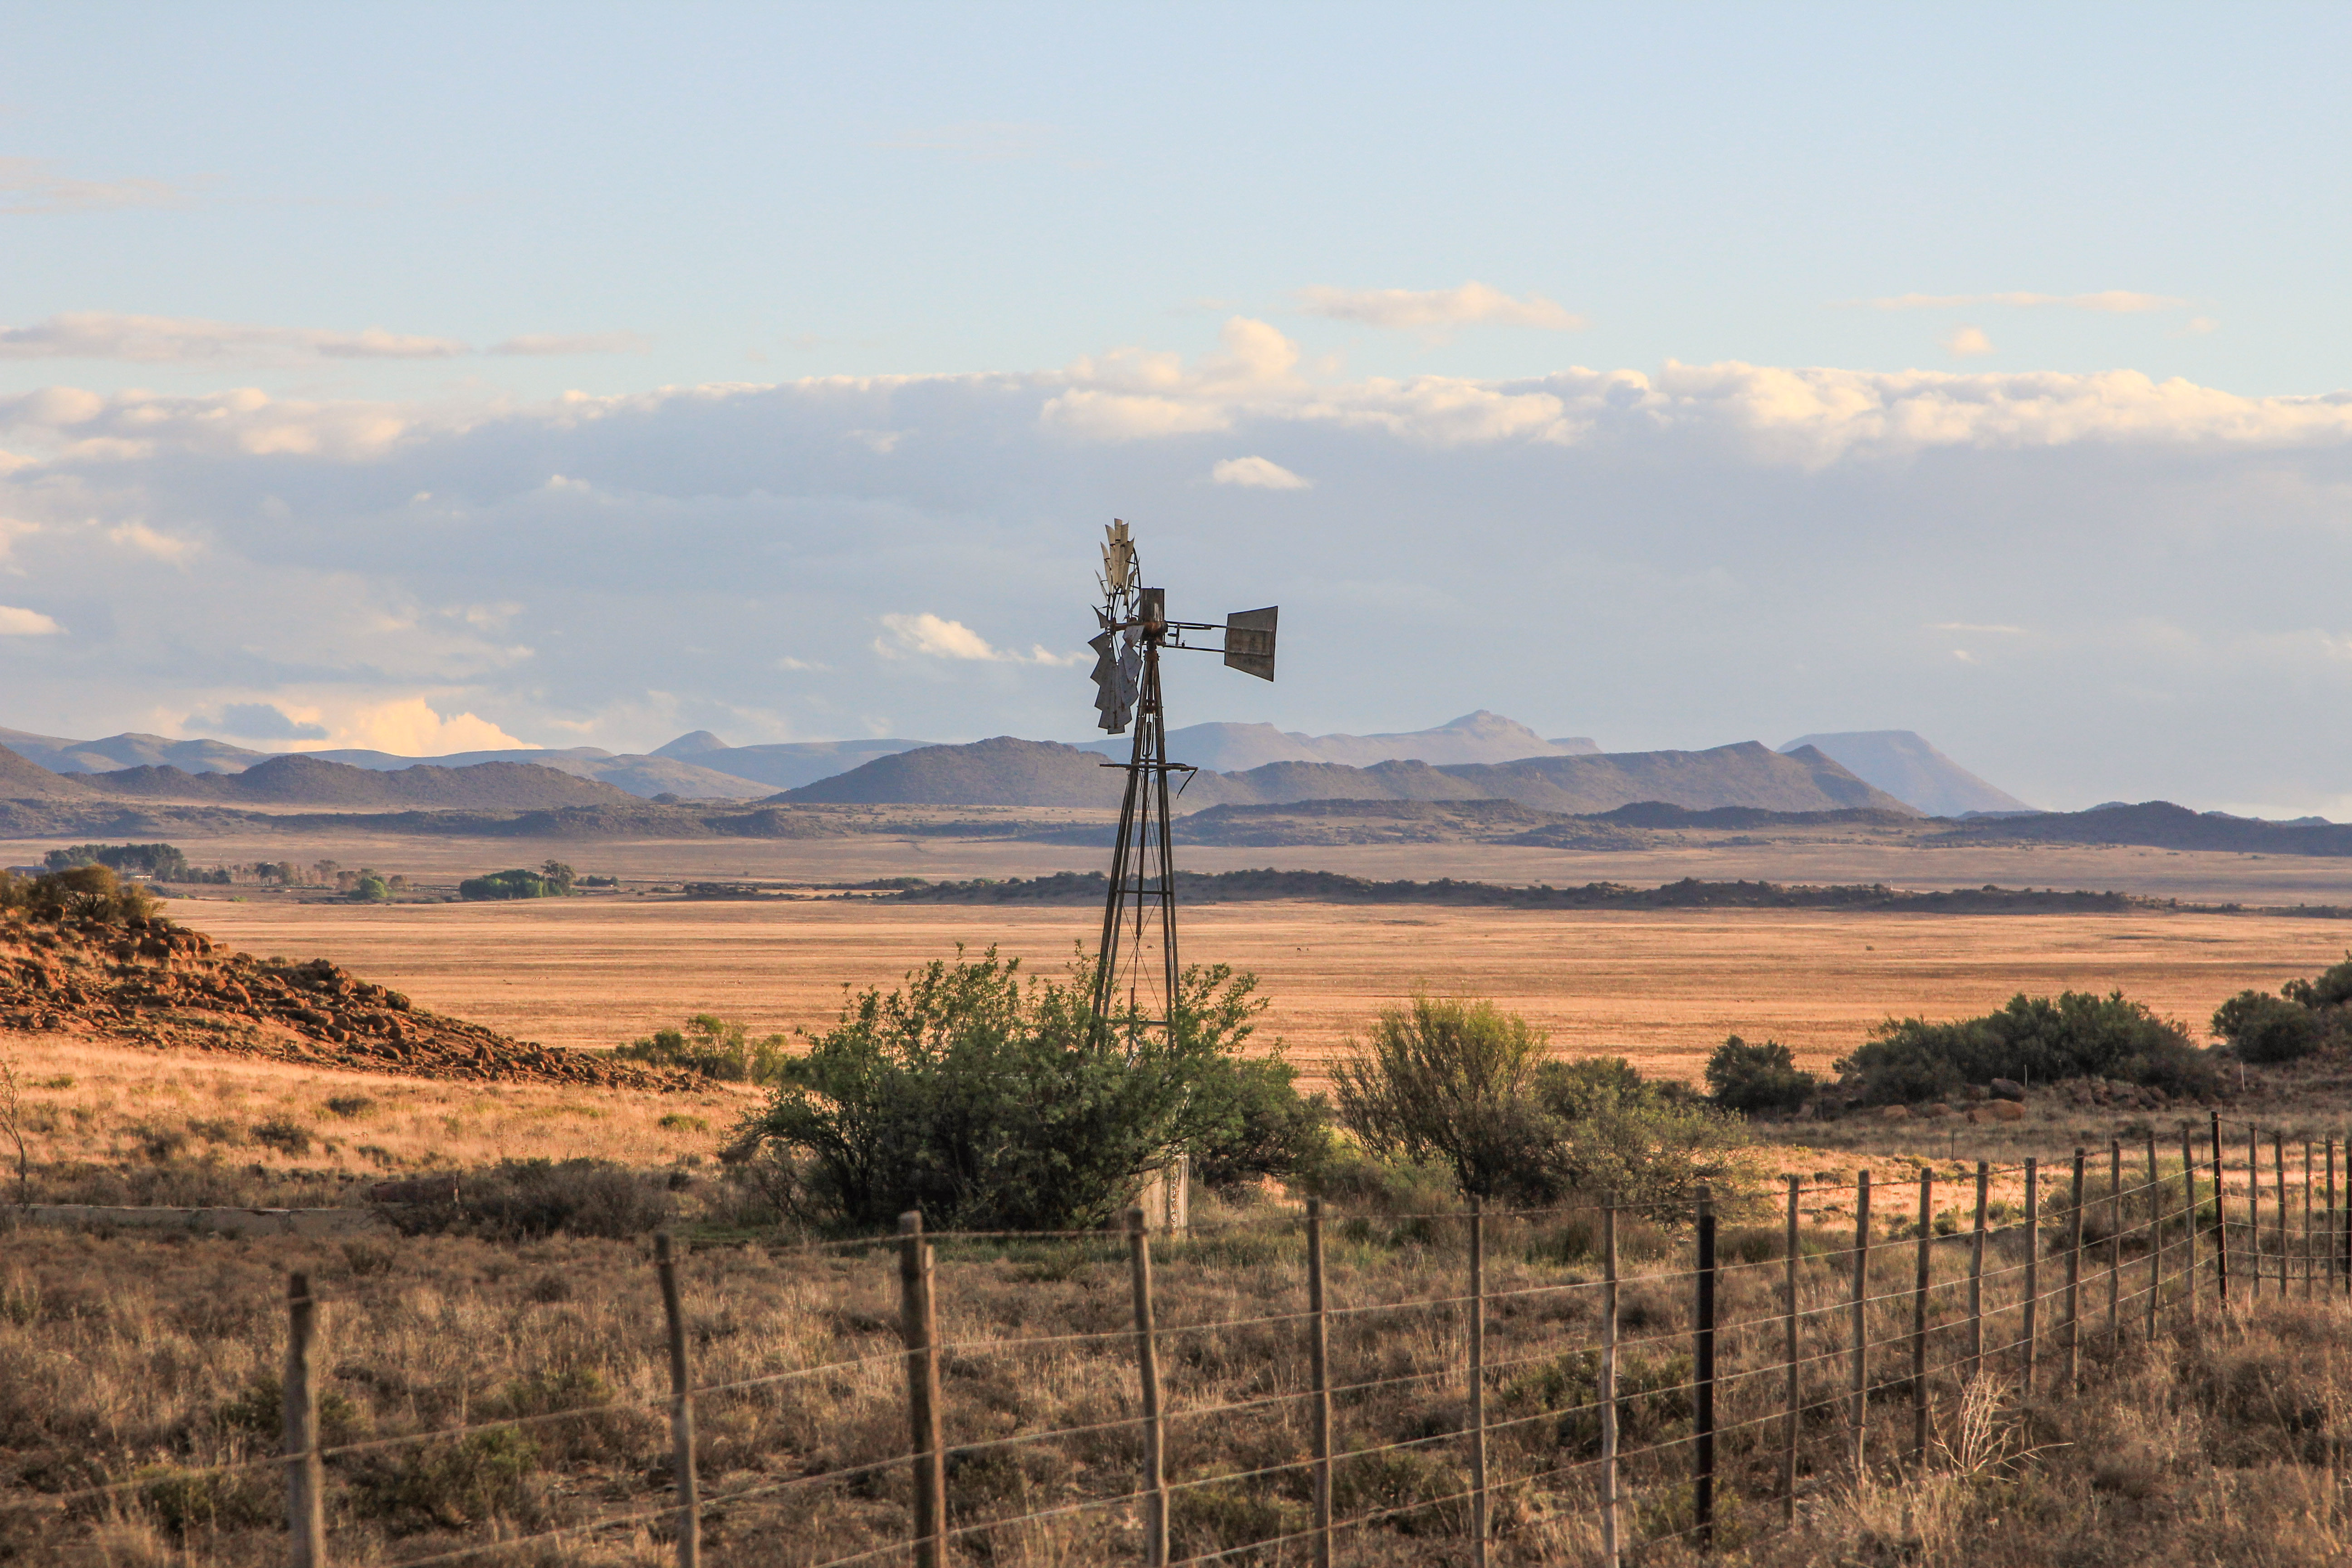 A typical Karoo scene, held together by the windpump. Image: Chris Marais